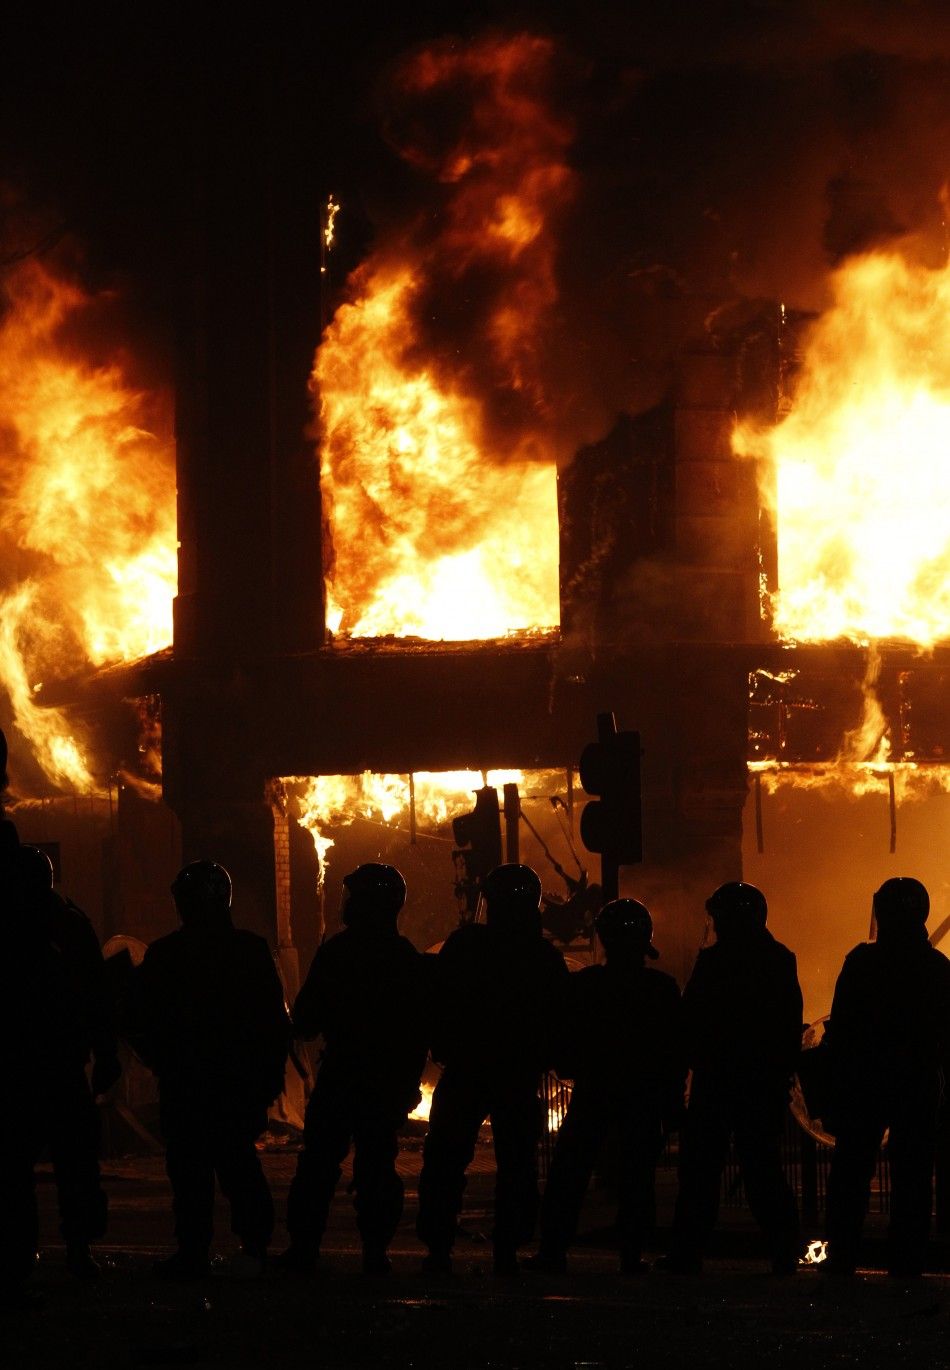 Tottenham Riot North London Ablaze with Violence and Protests.